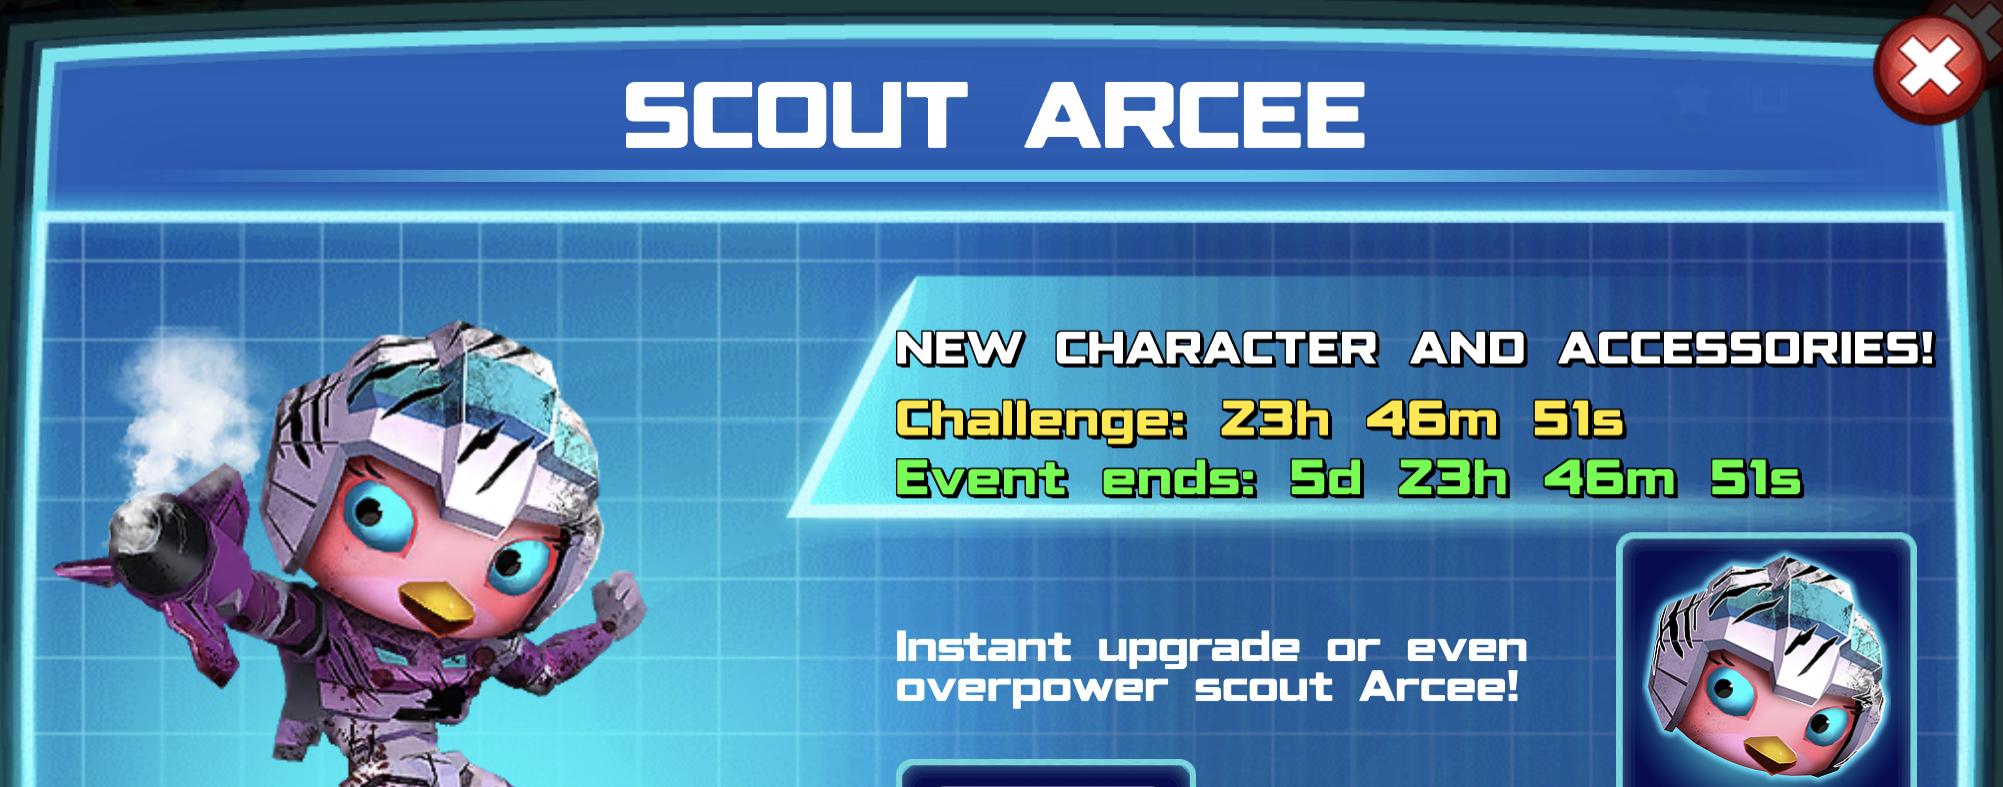 The event banner for Scout Arcee